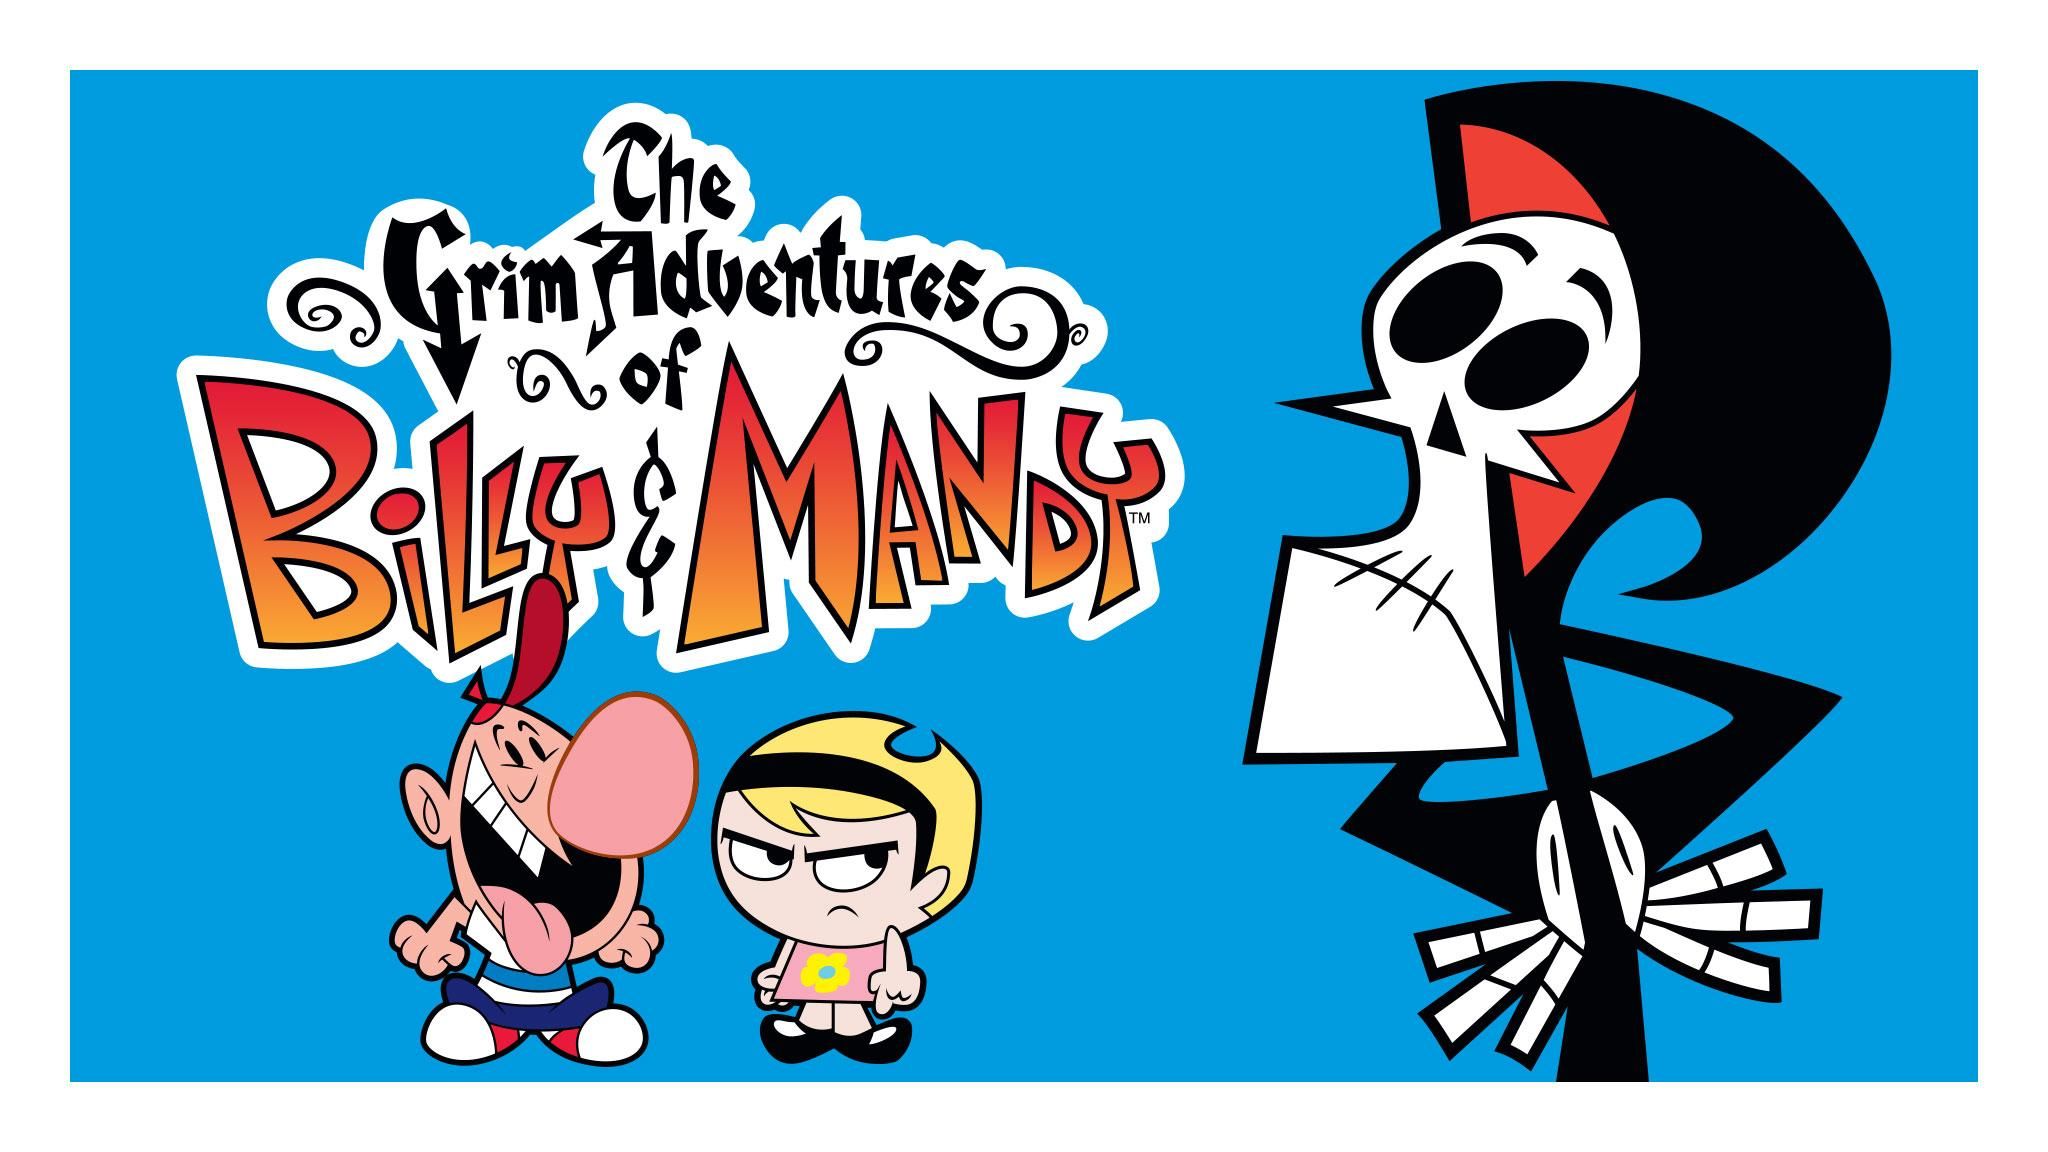 Stream And Watch The Grim Adventures of Billy & Mandy Online